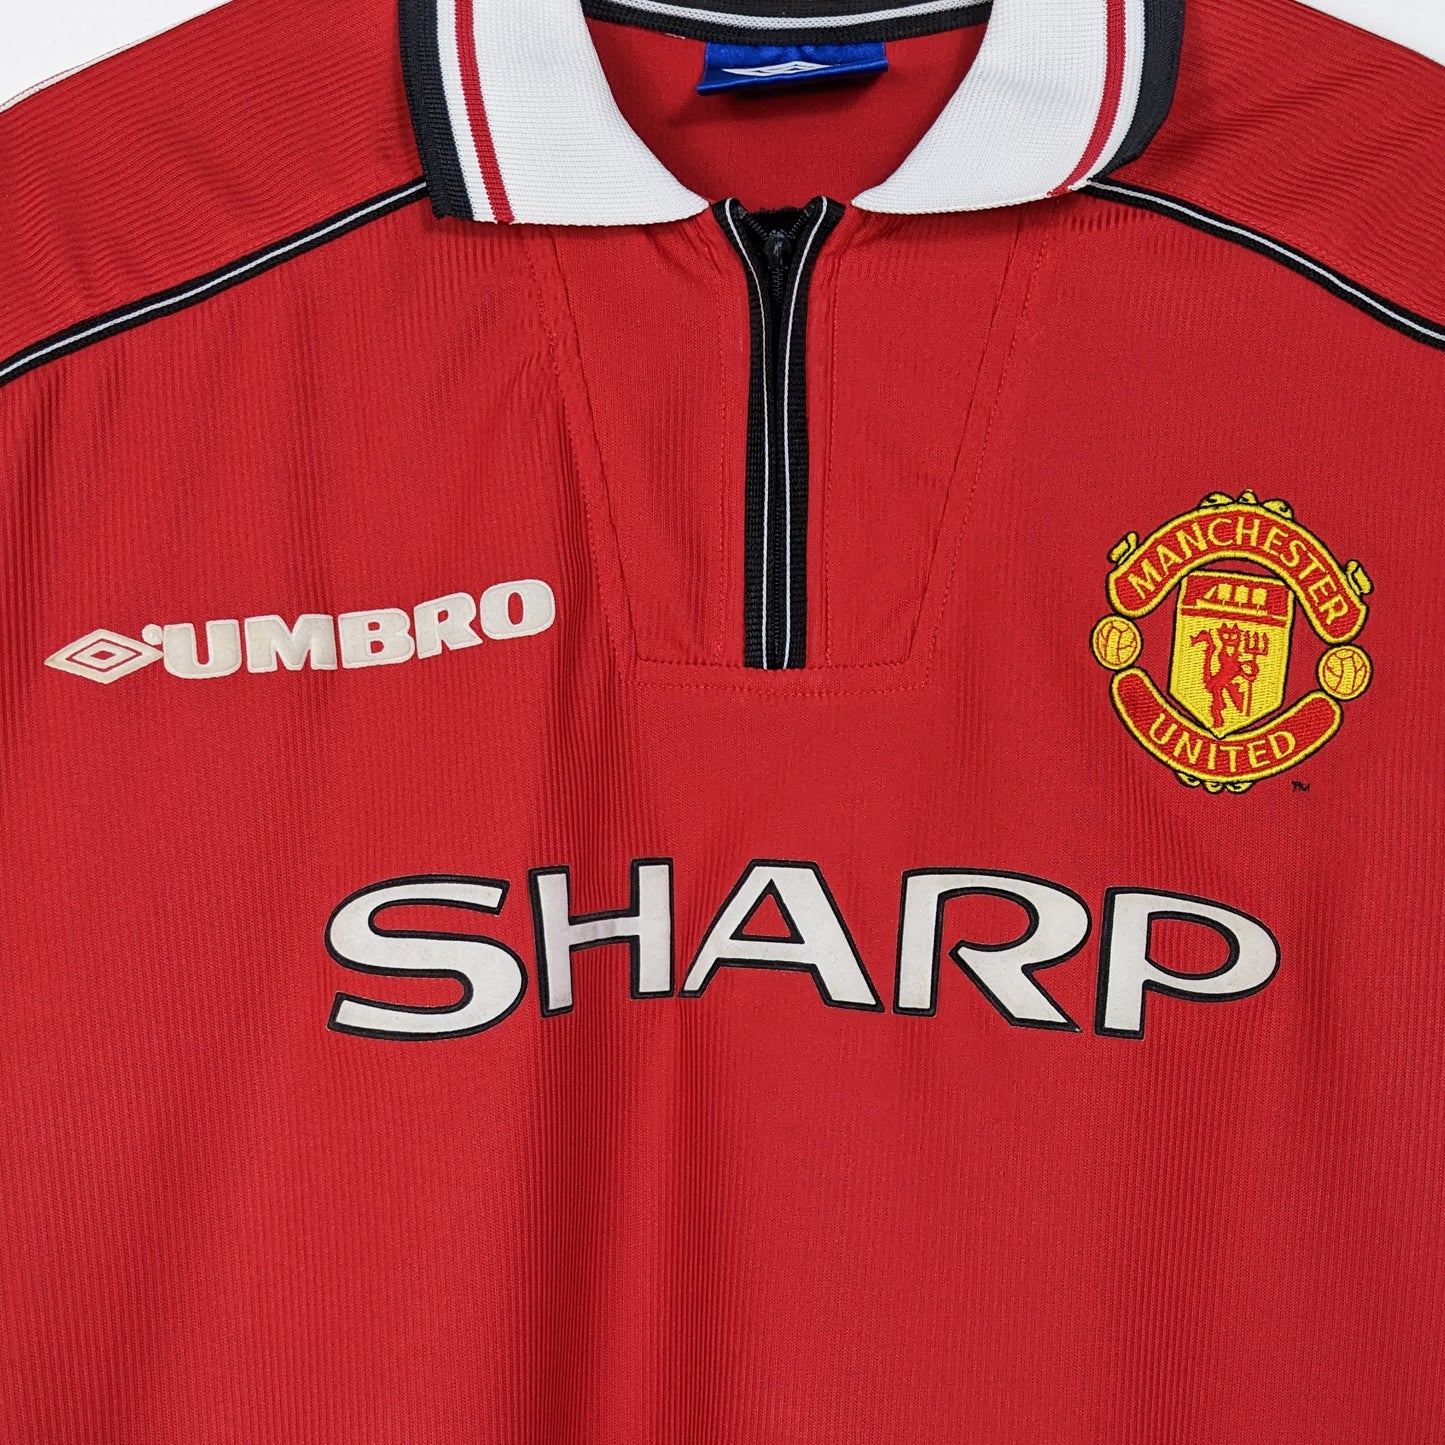 Authentic Manchester United 1998/1999 Home - Beckham #7 Size L